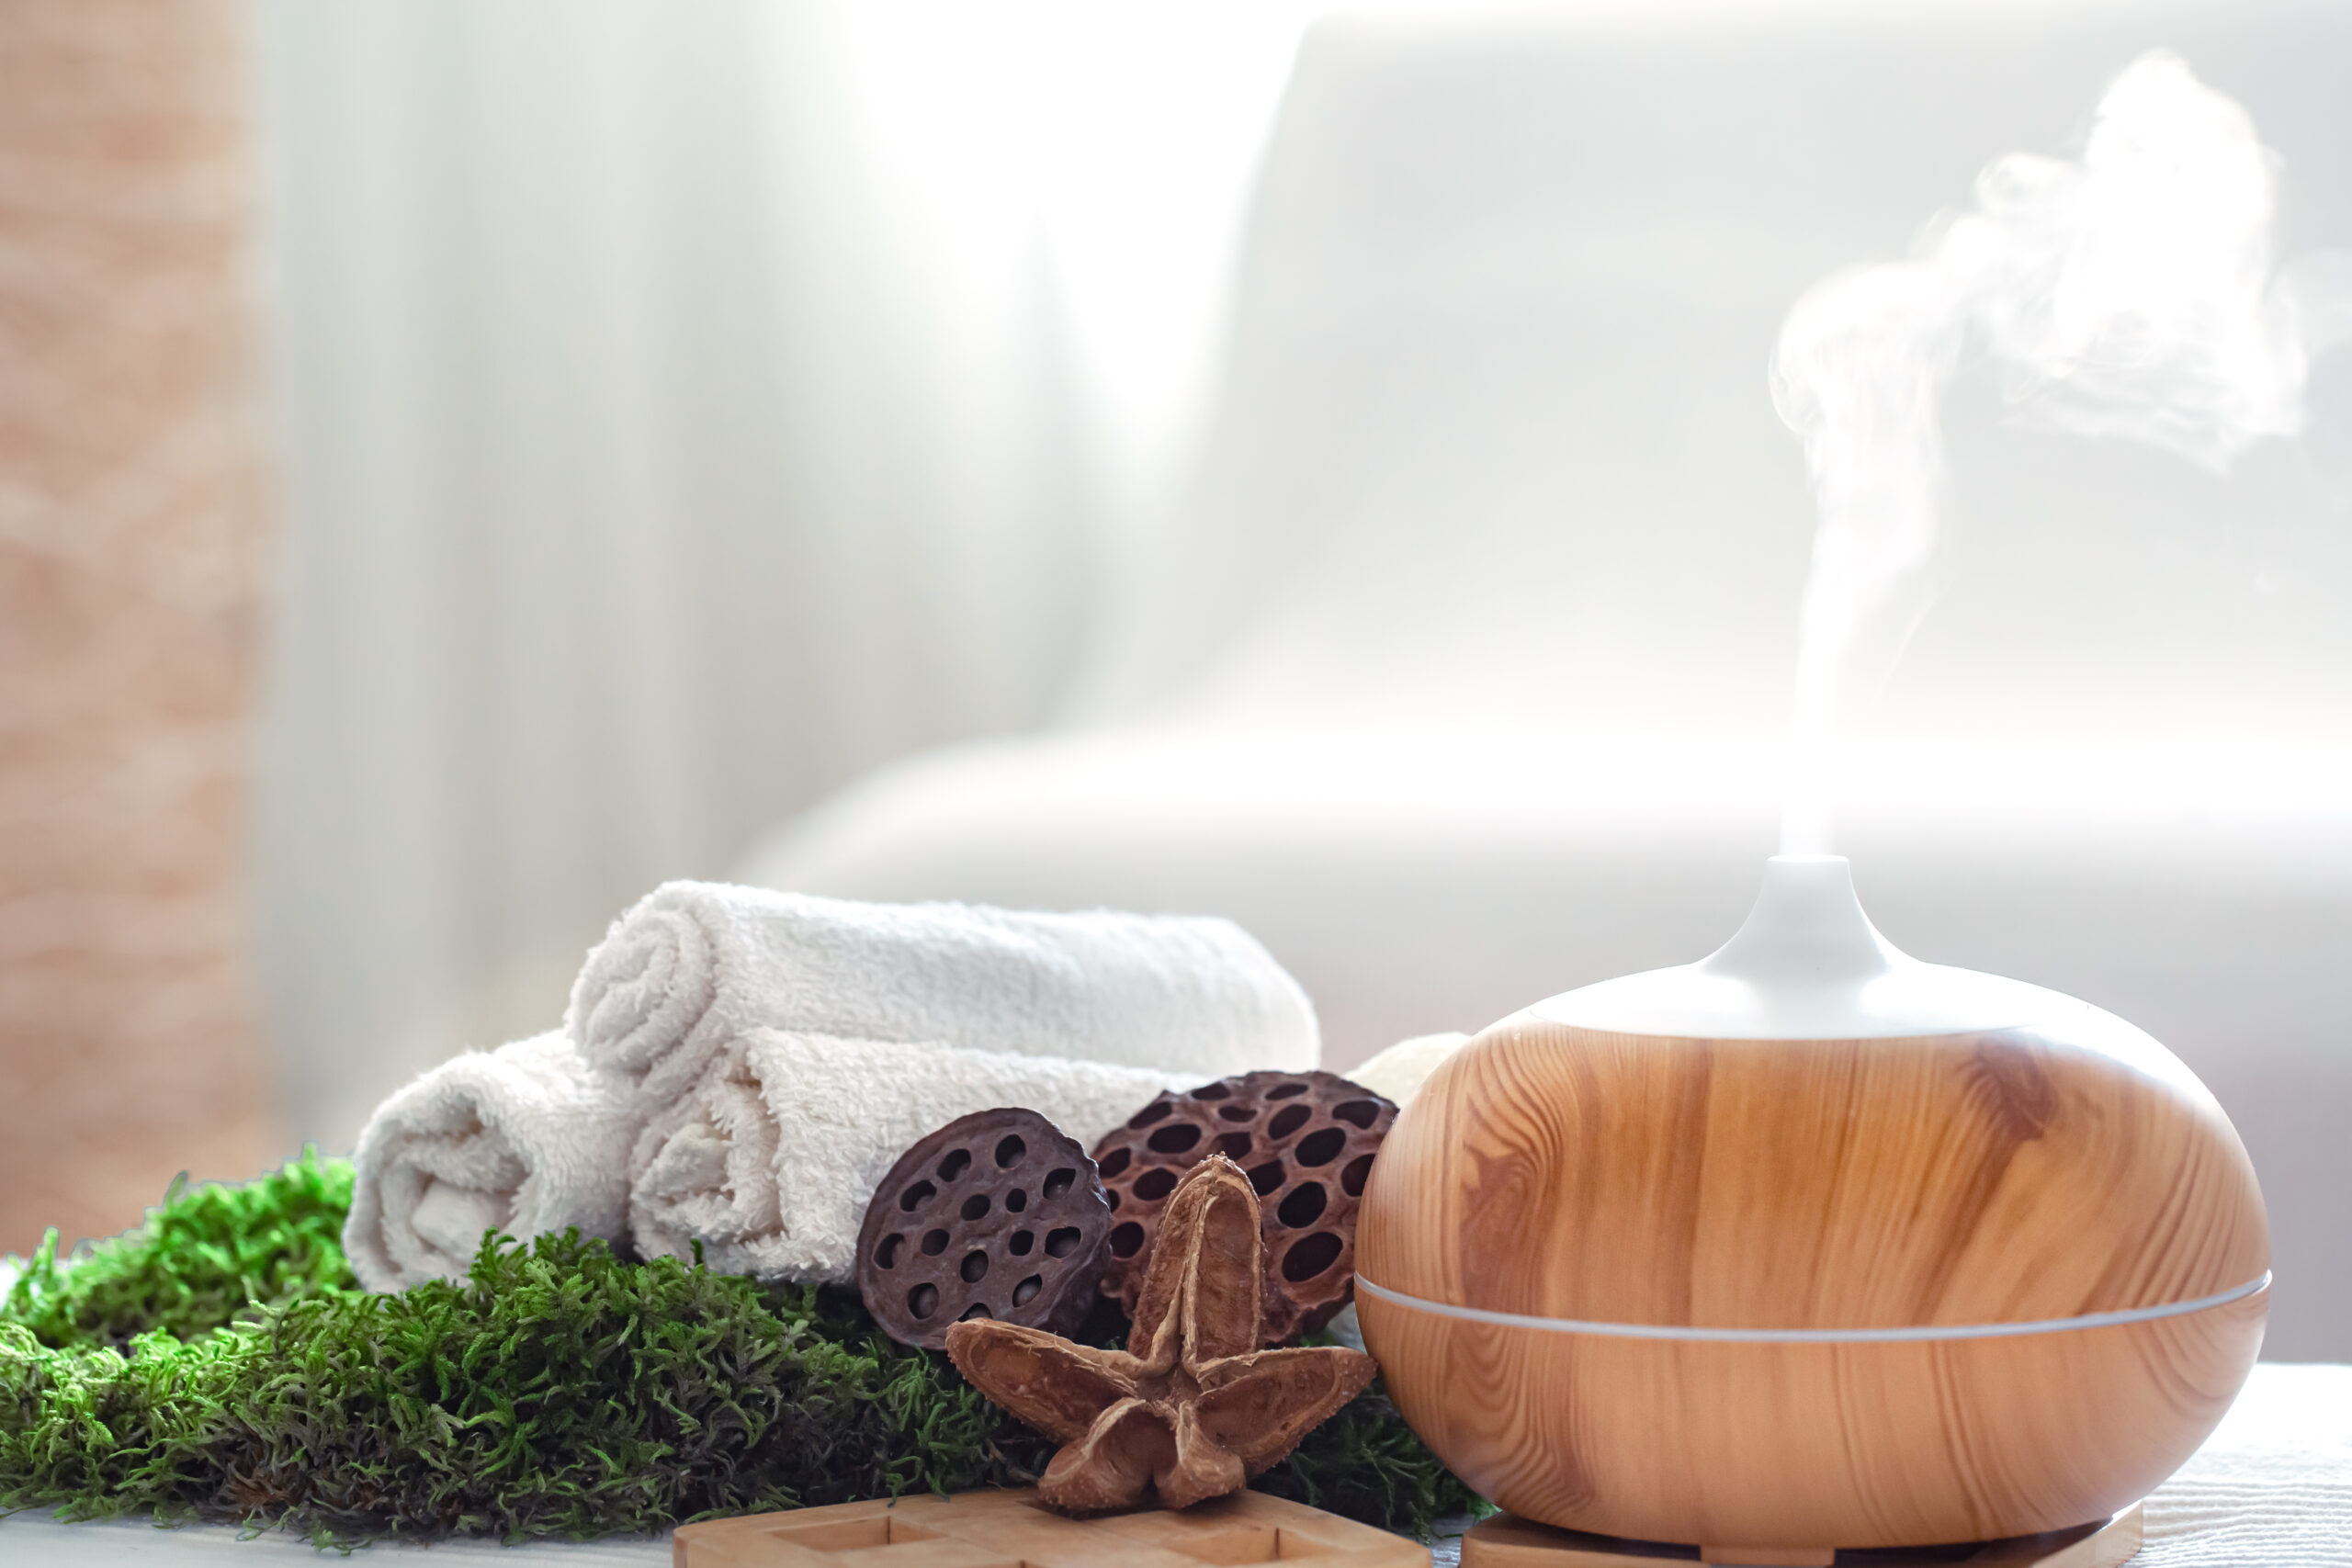 ￼Asian Massage Near Me: What to Know Before Visiting a Therapist